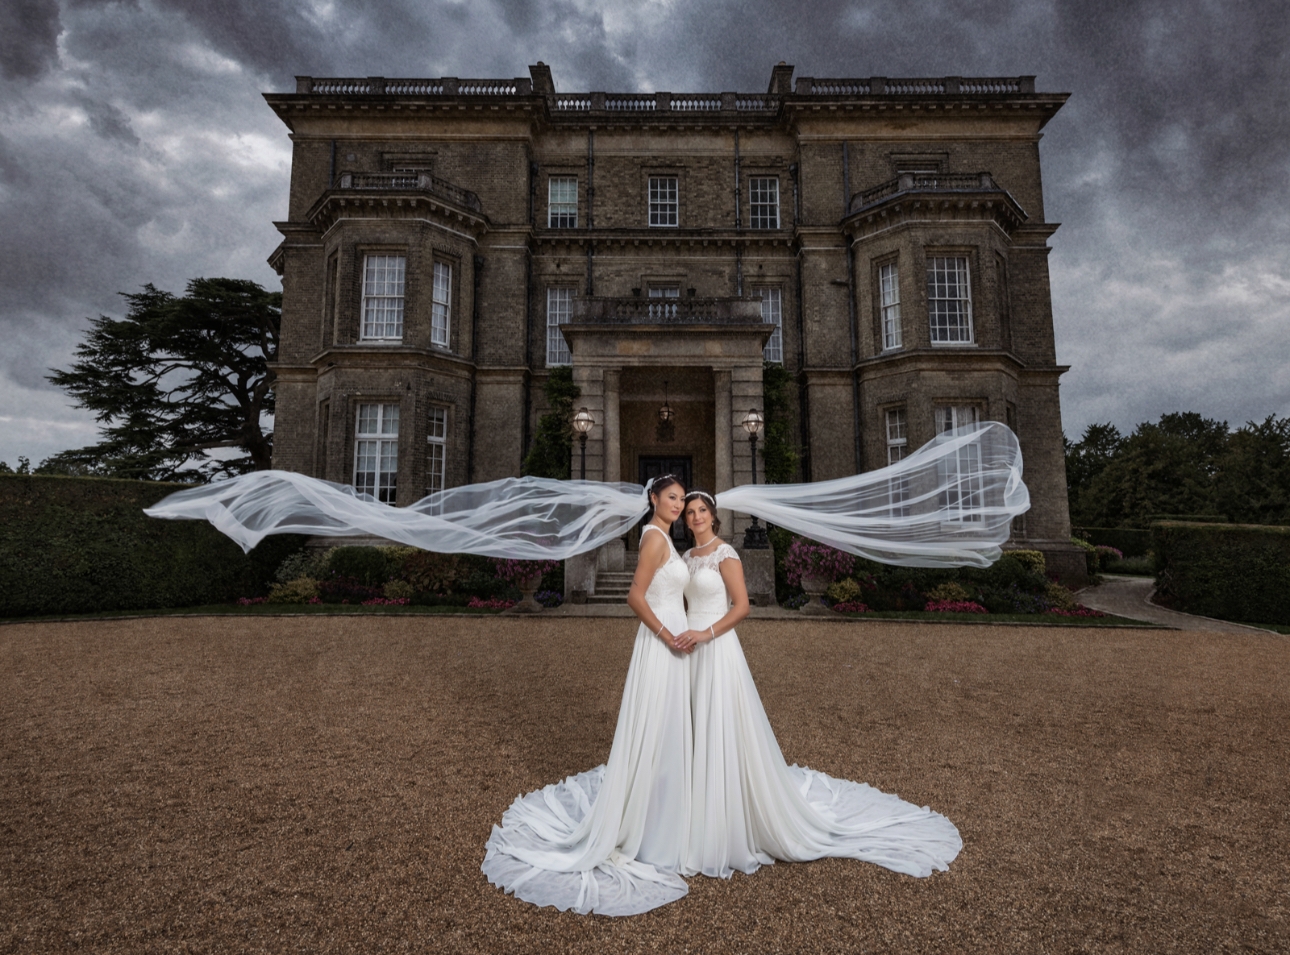 The 10 most Instagrammed wedding venues are revealed with Hedsor House no two